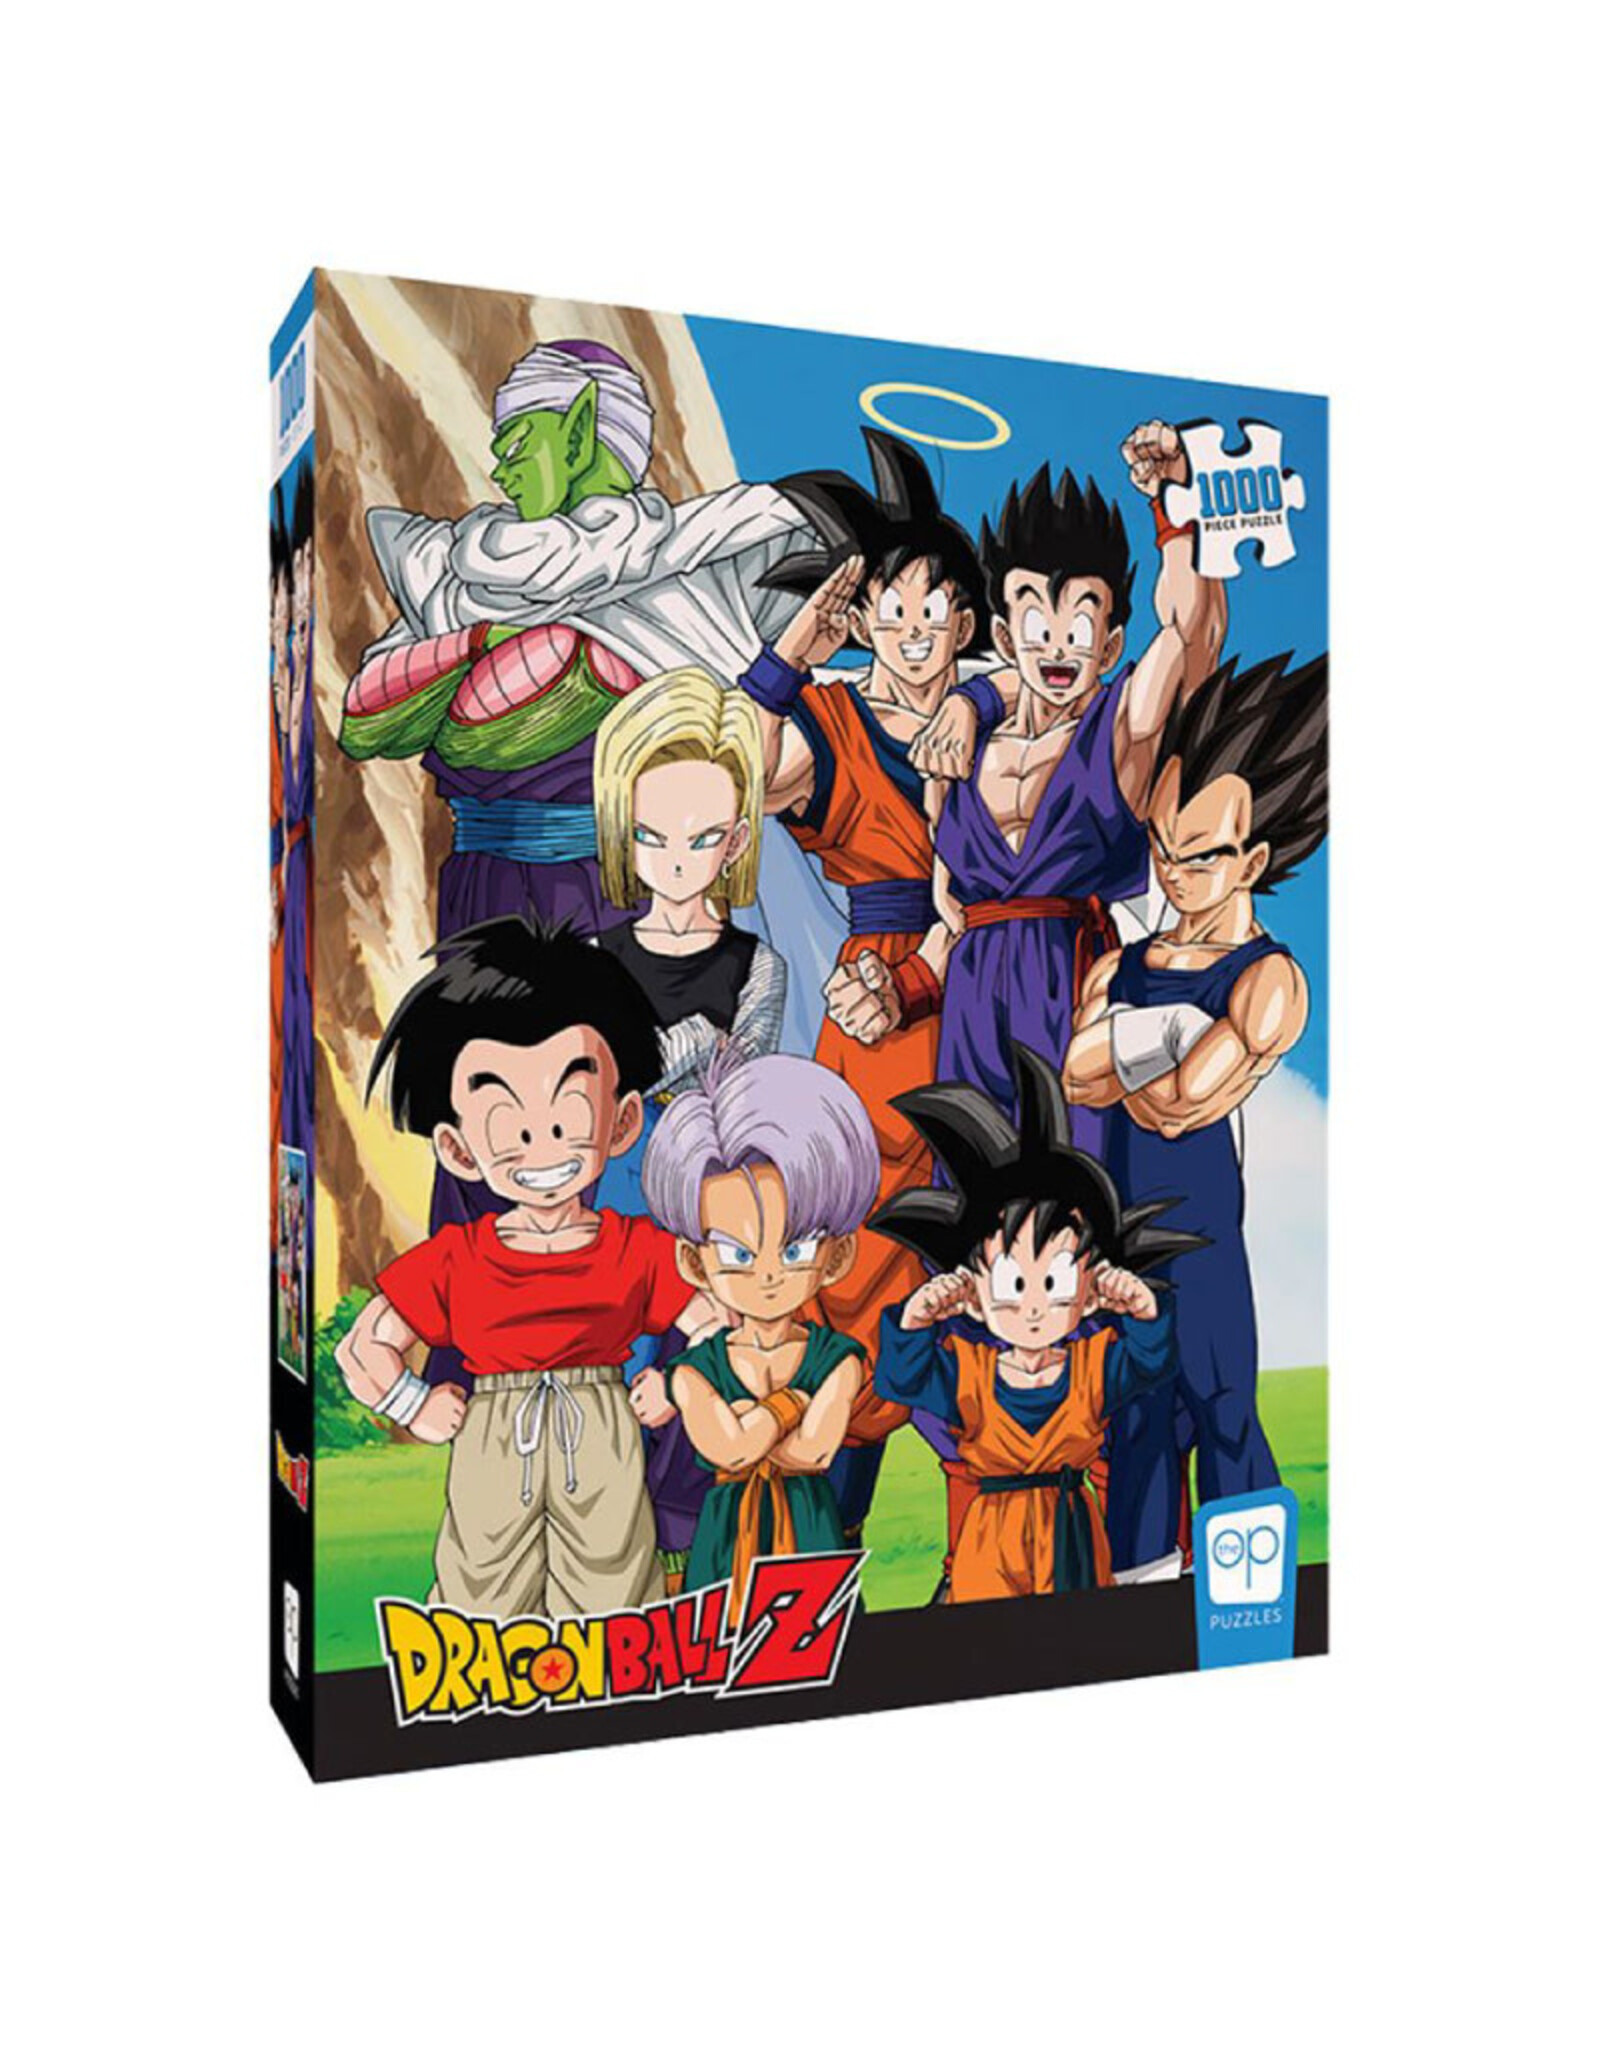 USAopoly Dragon Ball Z Buu Fighters Puzzle 1000 PCS